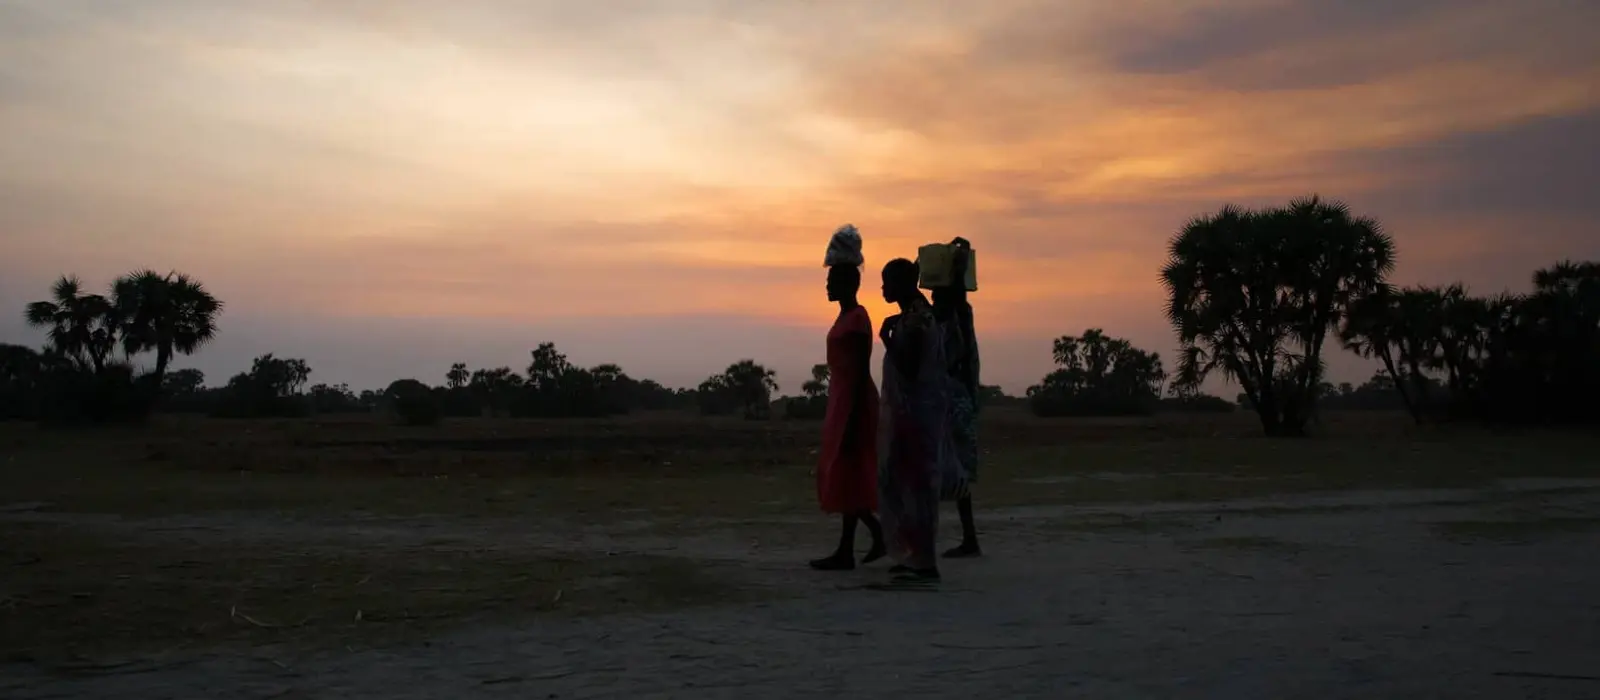 Women at sunset in South Sudan